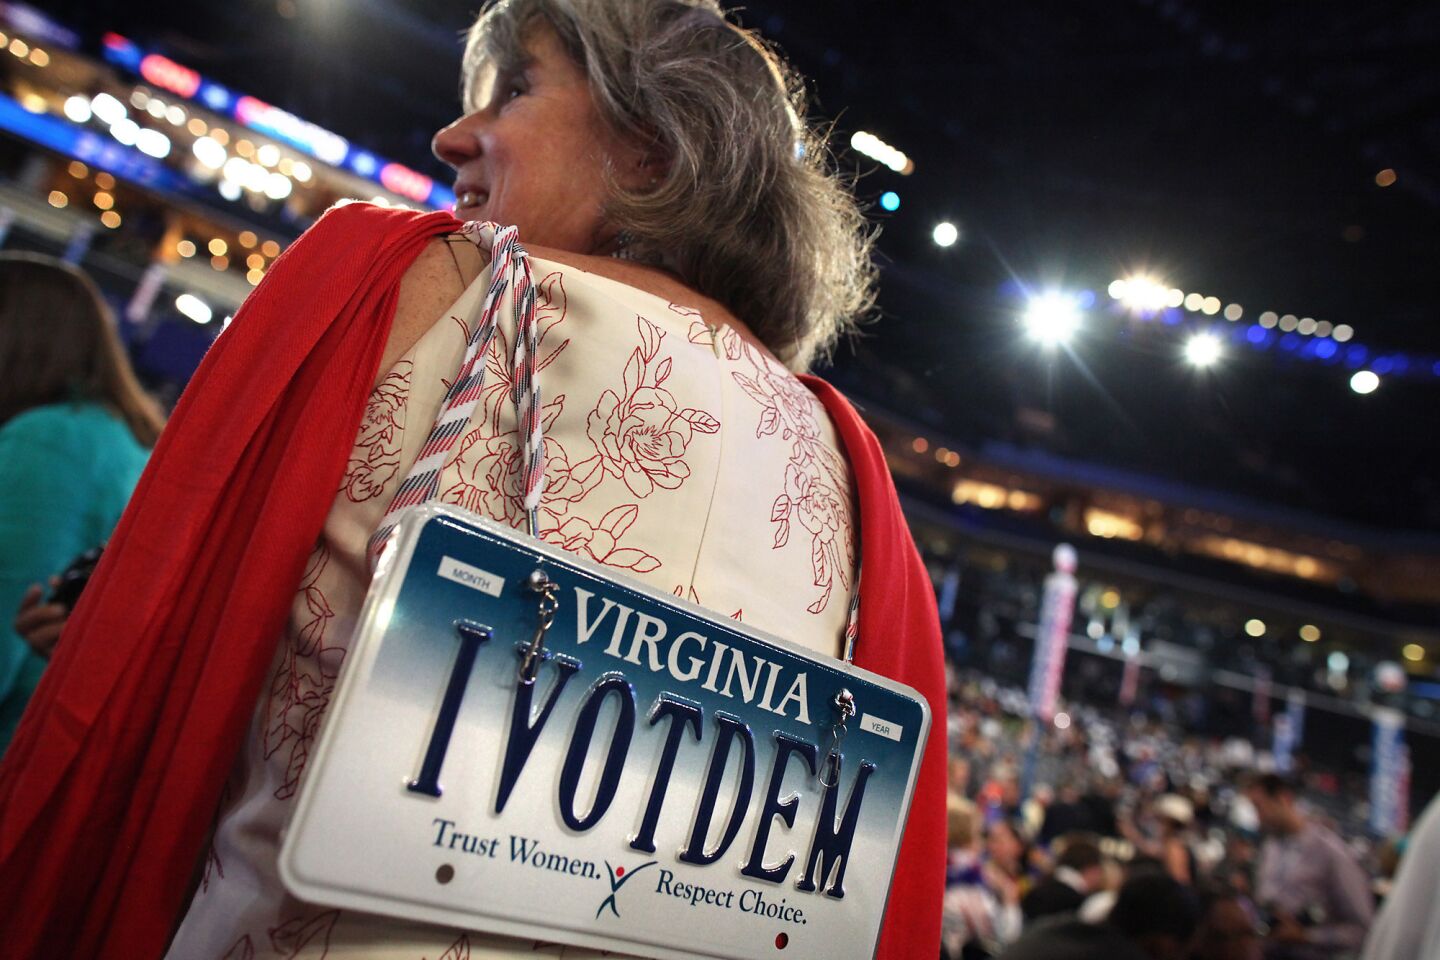 Virginia delegate Victoria Cochran wears her license plate on the floor at the Democratic National Convention in Charlotte, N.C.